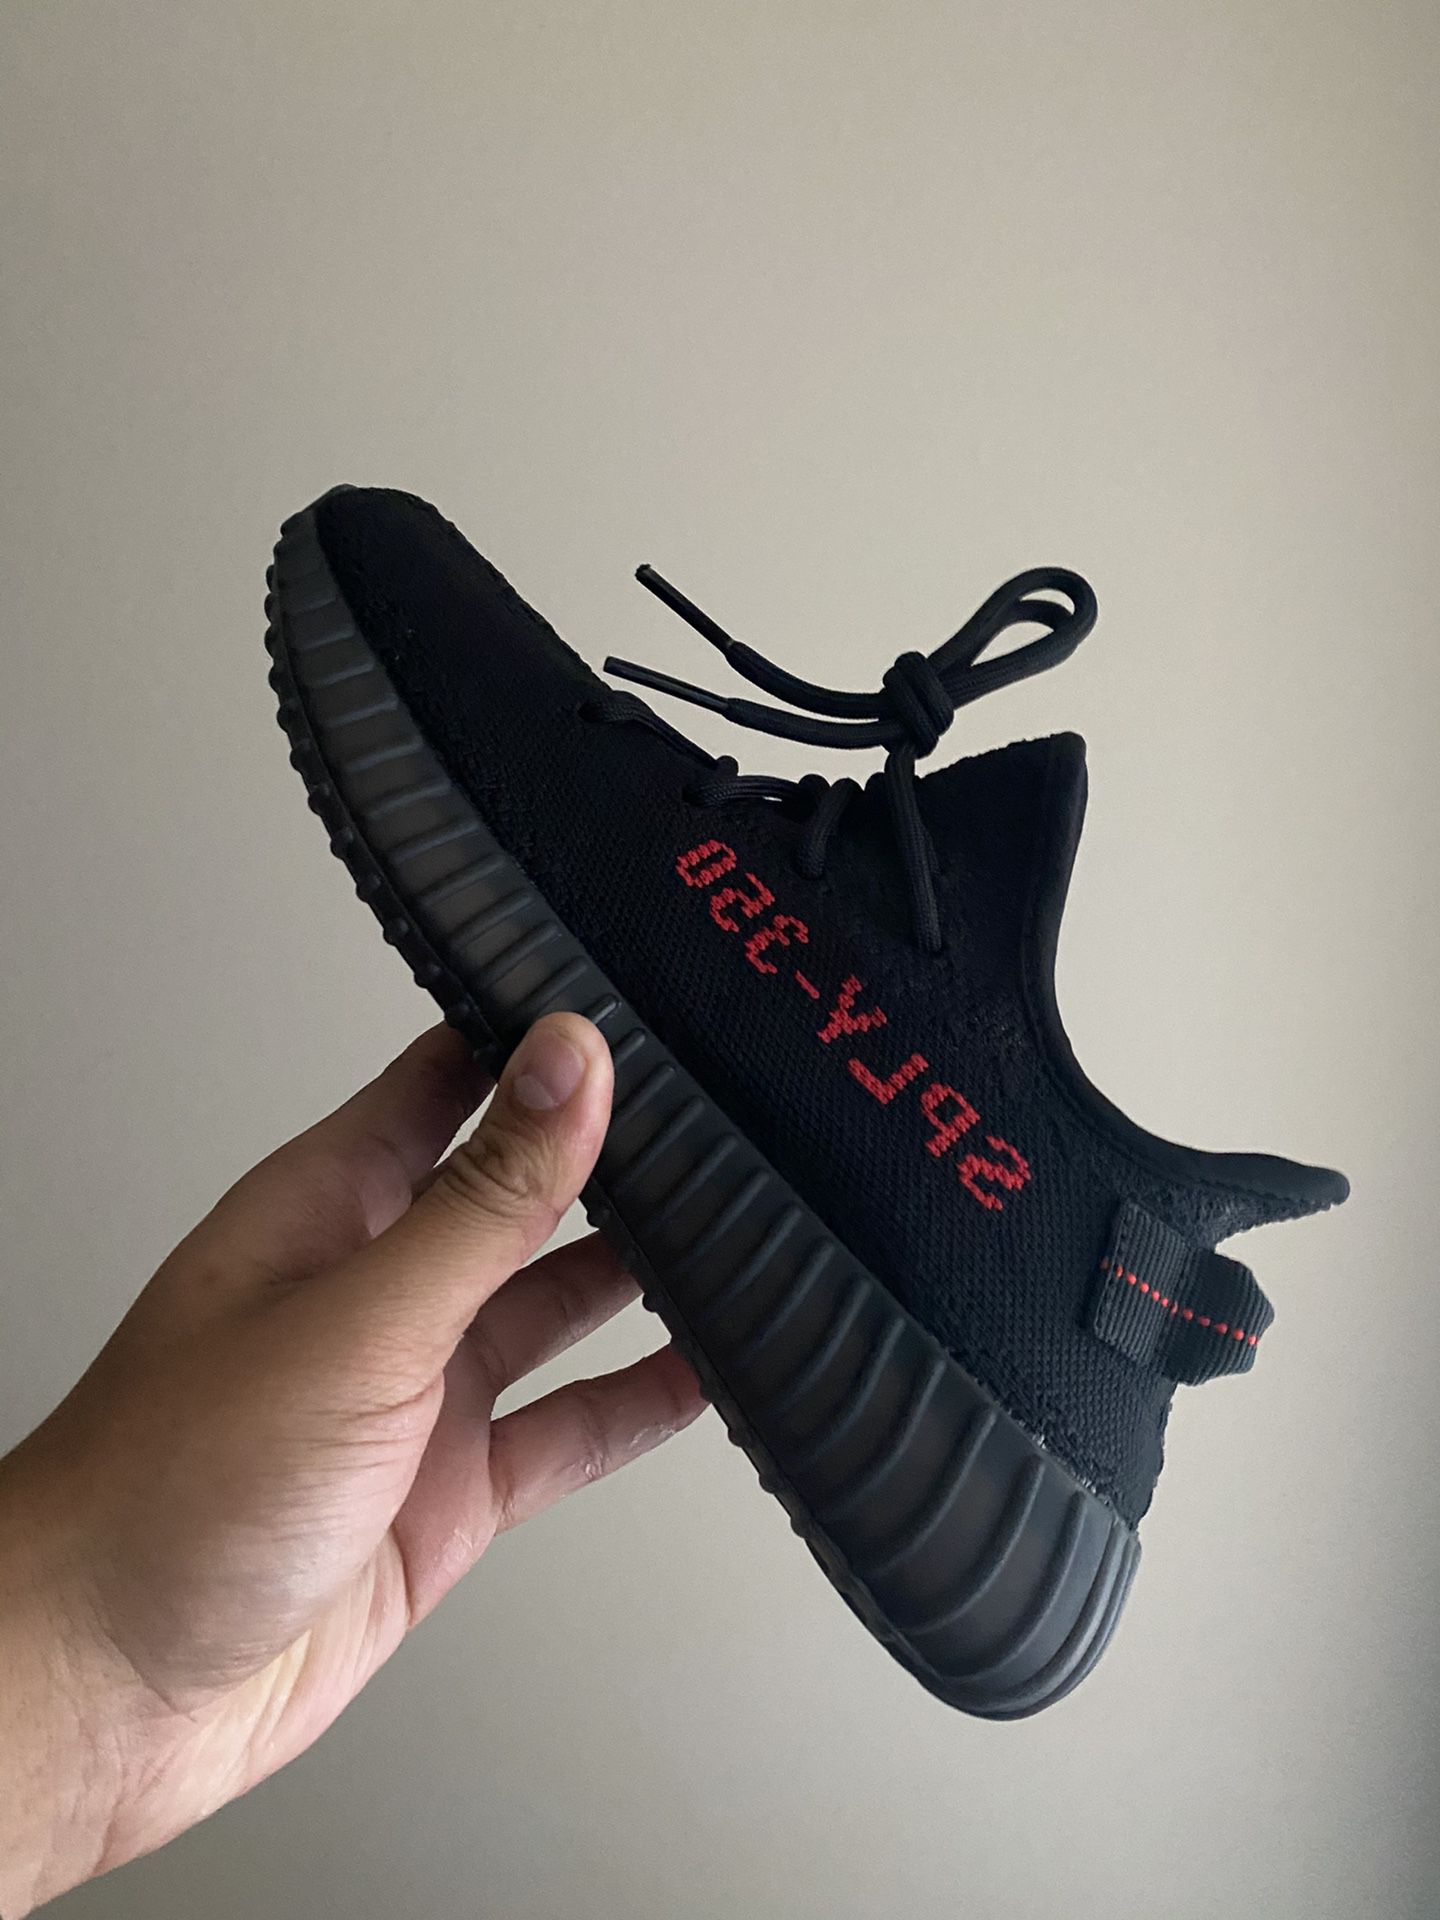 Adidas Yeezy boost v2 black and red